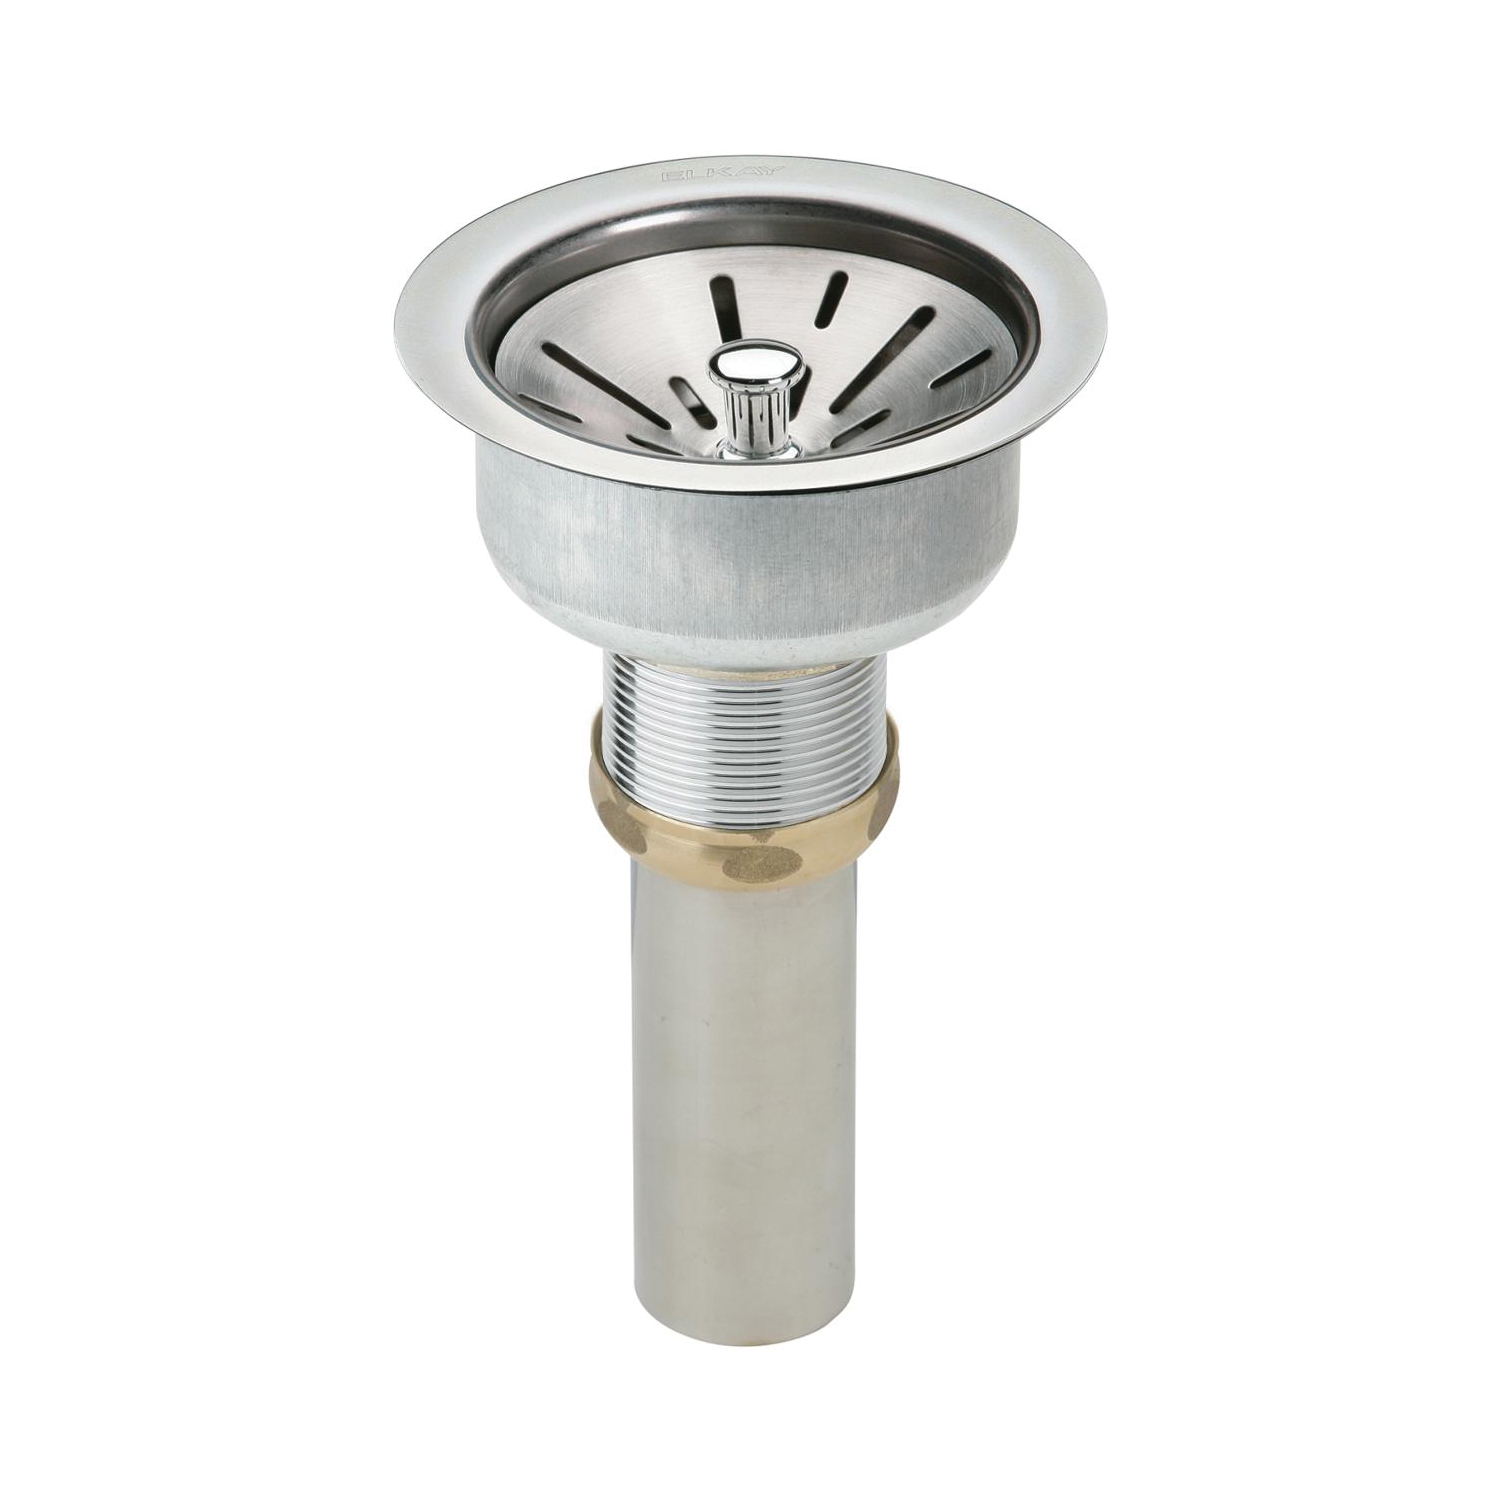 Elkay® LK35 Drain Fitting, 3-1/2 in Nominal, Polished Stainless Steel, 304 Stainless Steel Drain, Includes Lift Rod: No